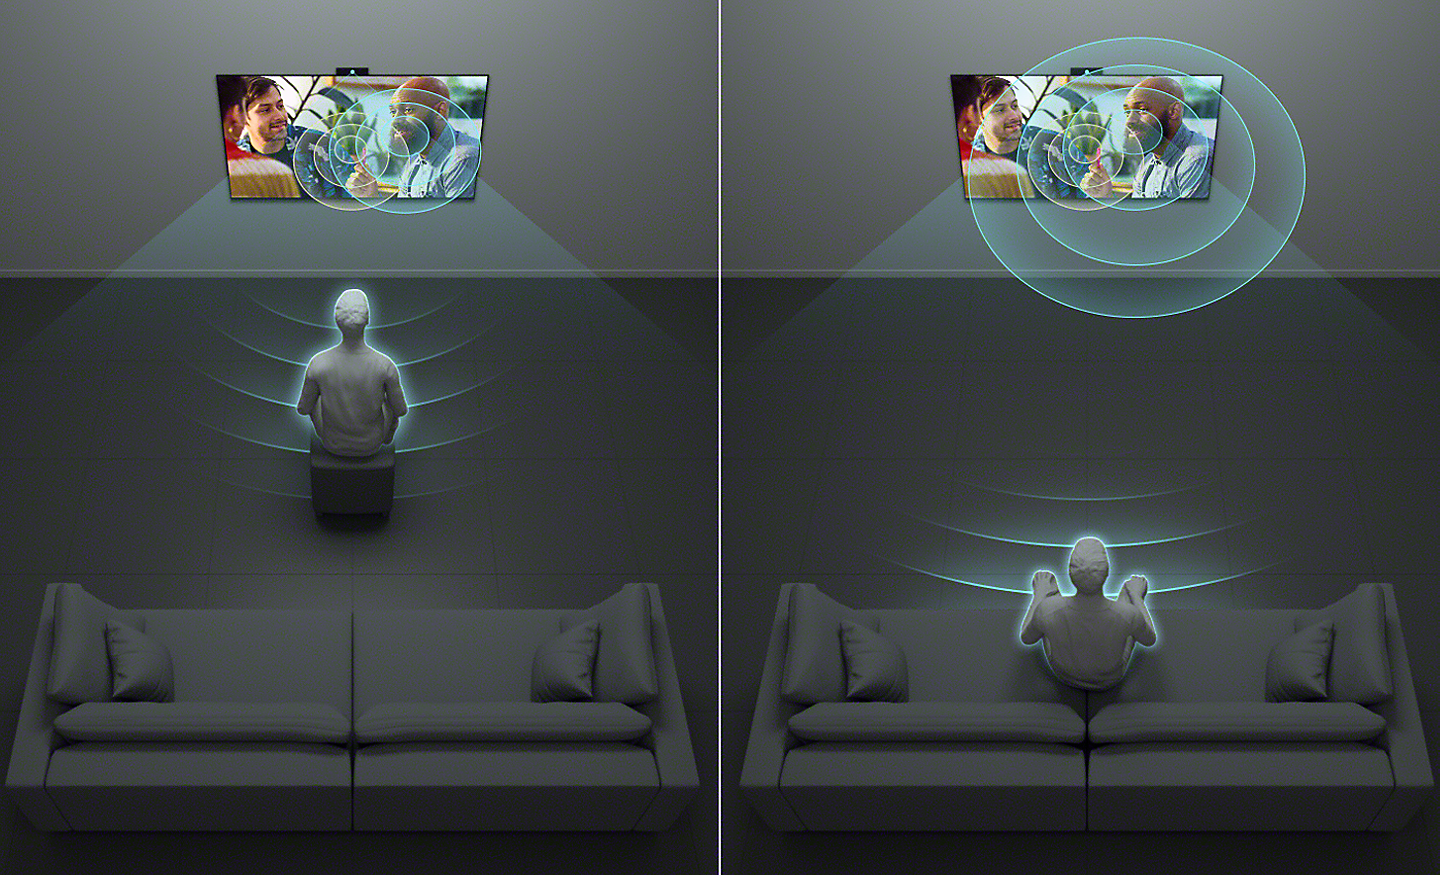 Split screen graphic showing someone watching TV from different positions: seated up close and seated further back